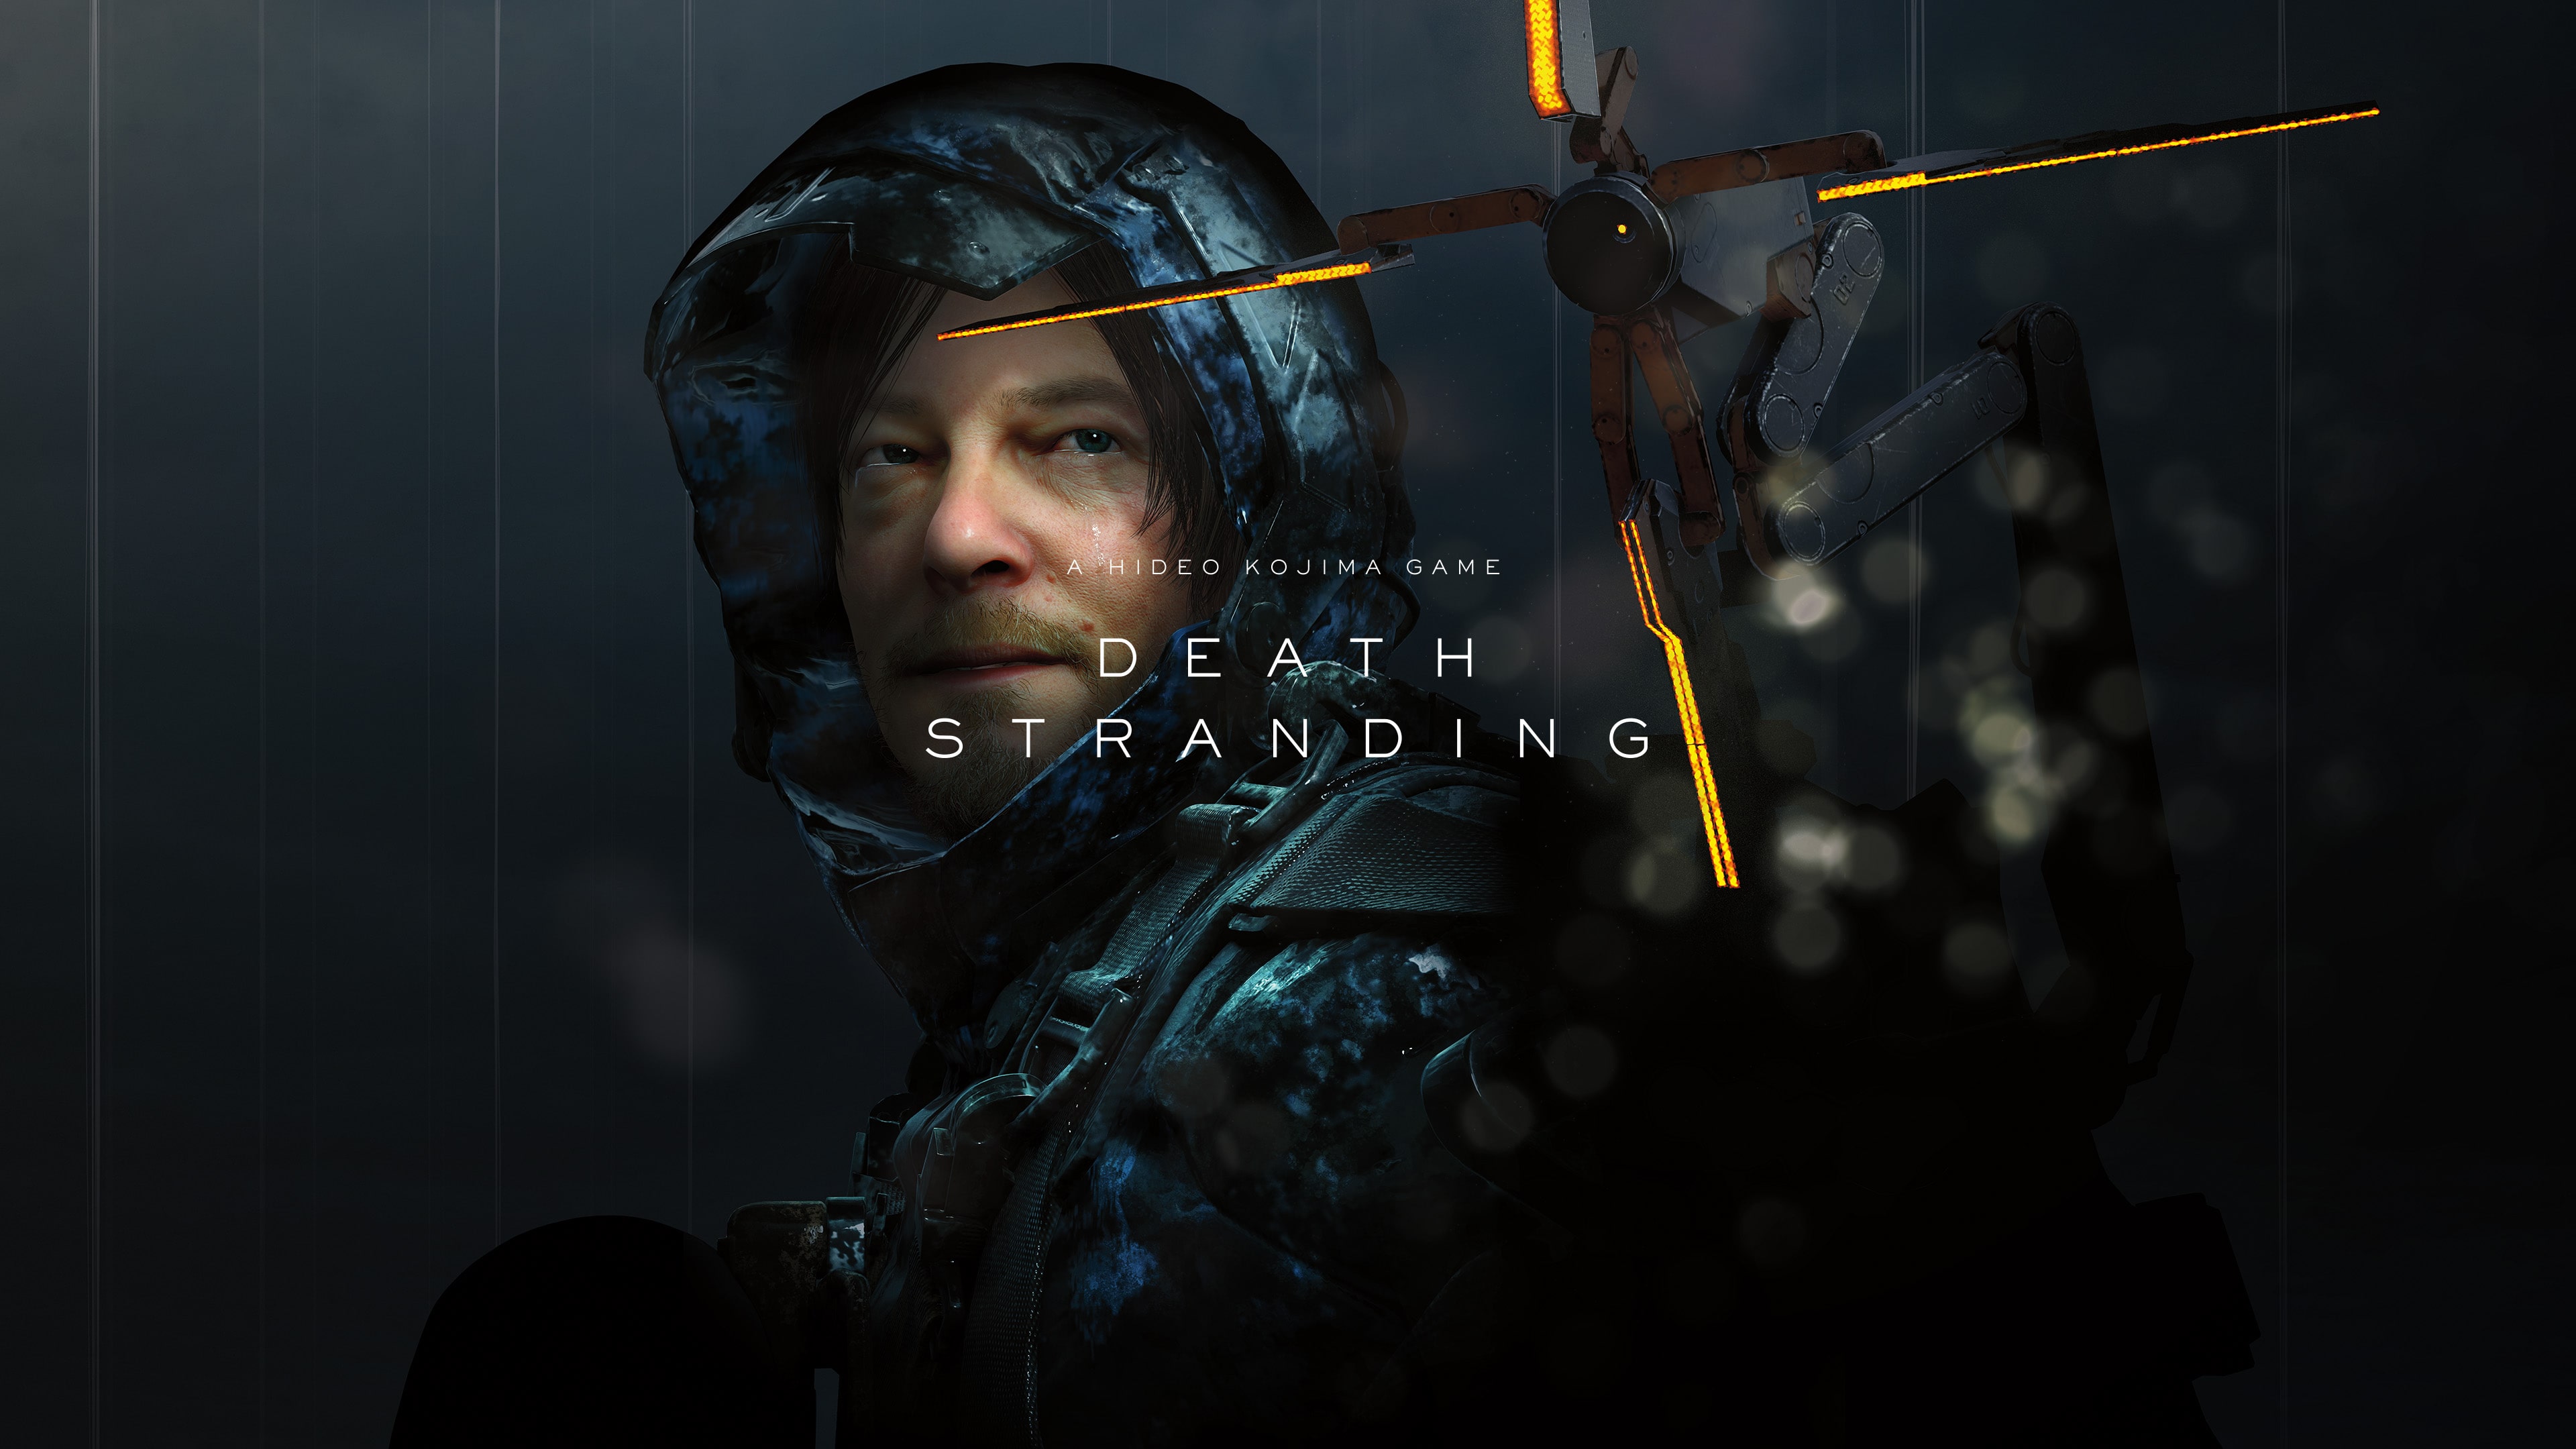 DEATH STRANDING Standard Digital Edition (Simplified Chinese, English, Korean, Traditional Chinese)